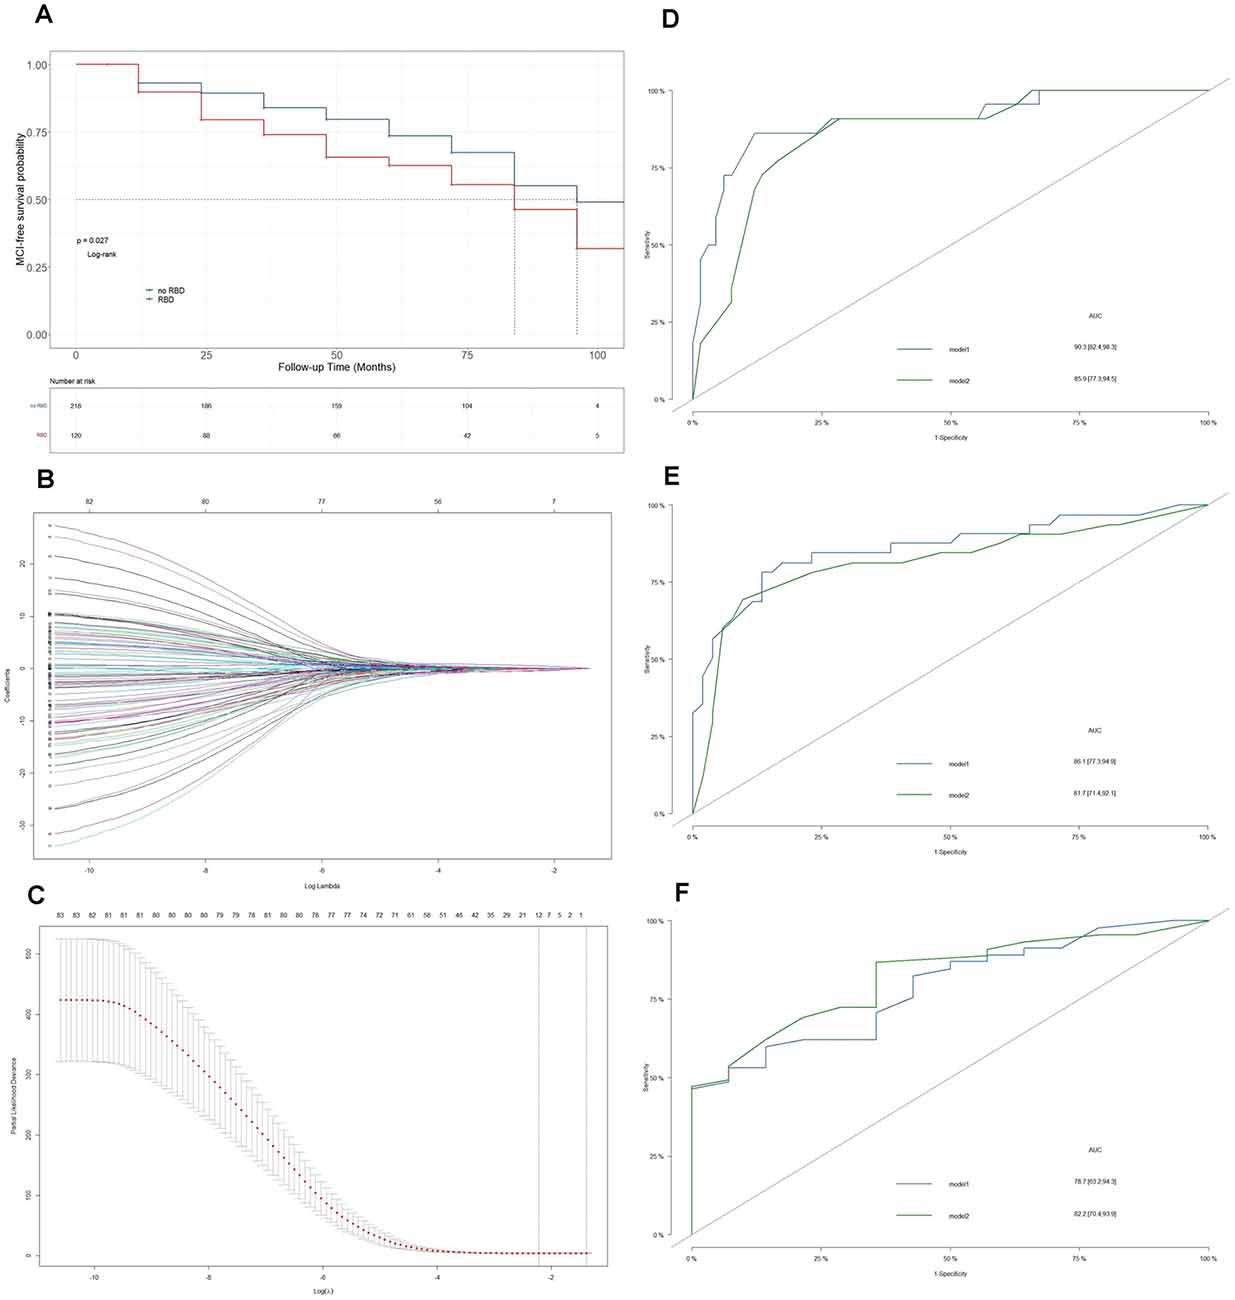 Frontiers | Development and Validation of a Prognostic Model for 